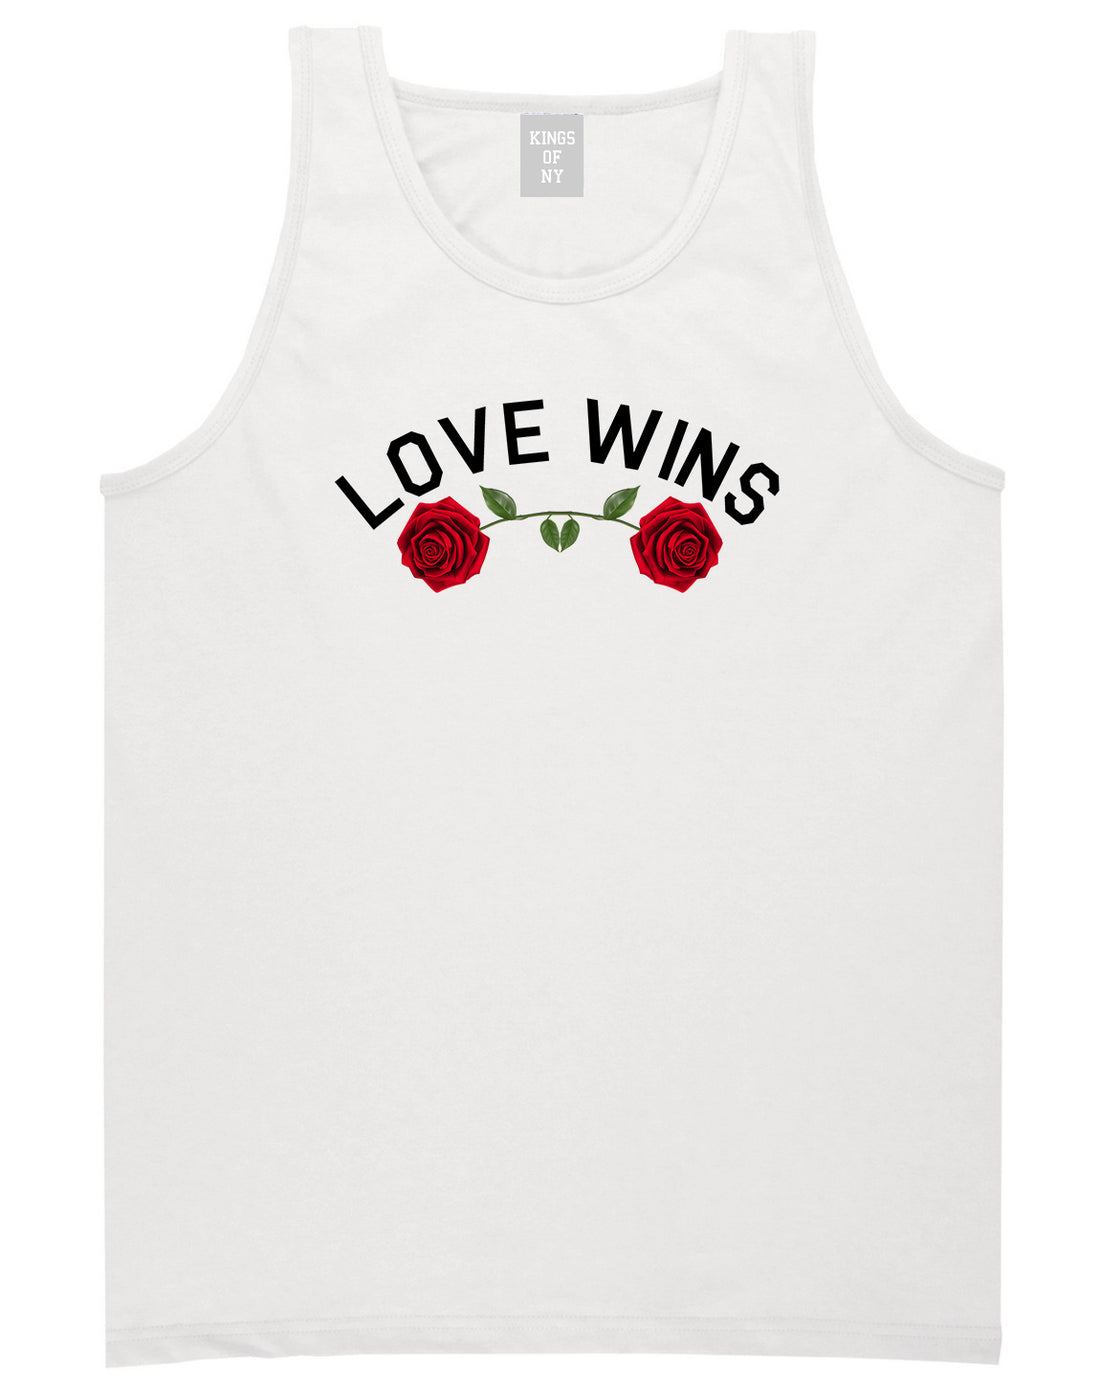 Love Wins Rose Mens Tank Top Shirt White by Kings Of NY